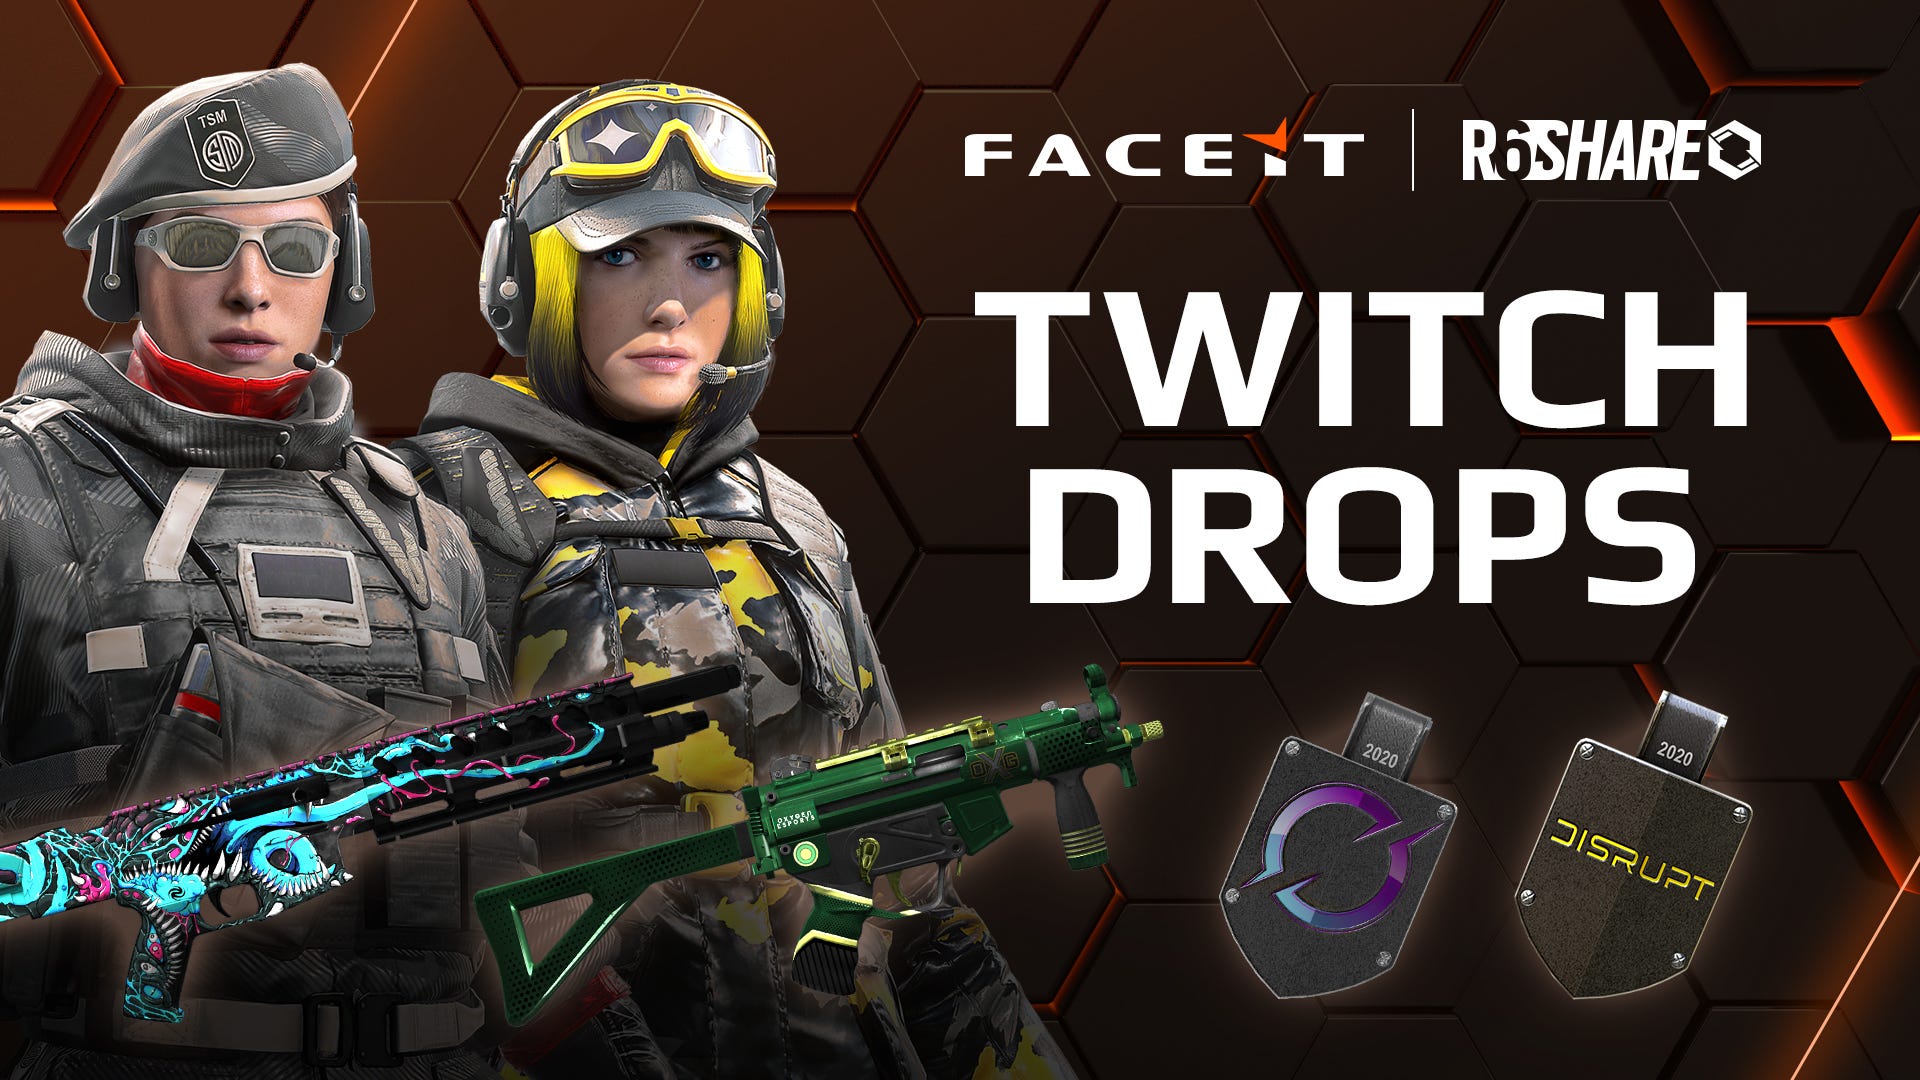 Earn Faceit Points Drops On Twitch For Watching Rainbow Six Siege By Joel Chapman Faceit